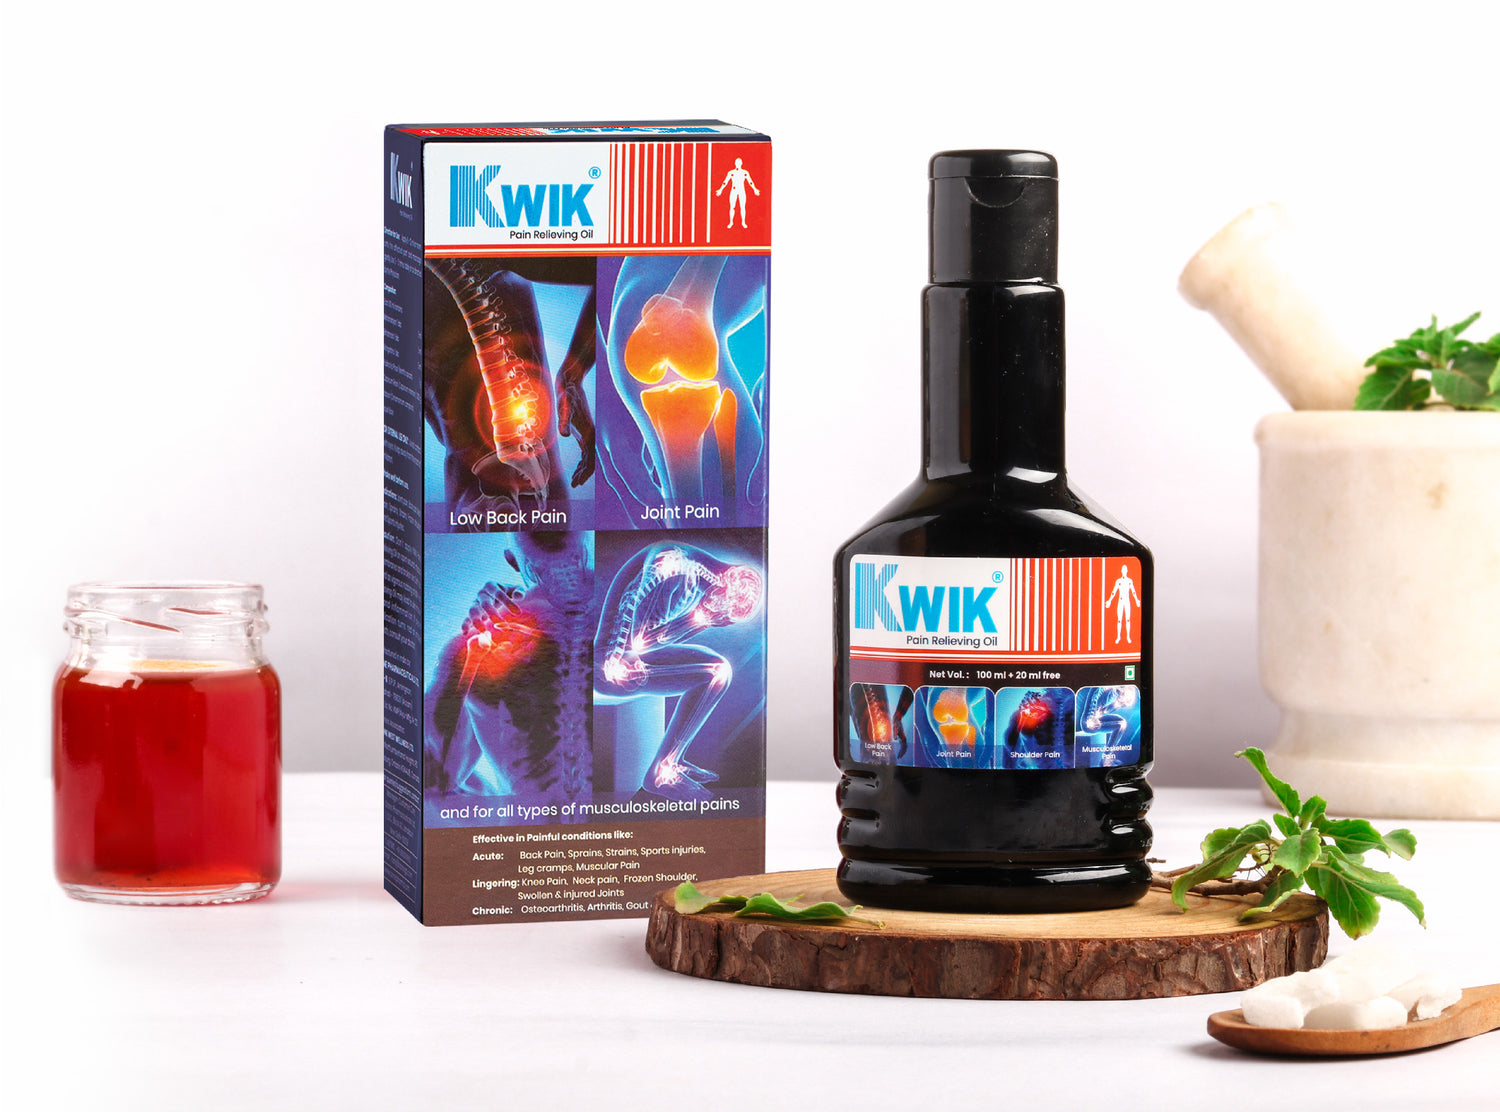 Kwik Pain Relief oil bottel with branding, featuring the product name and logo.